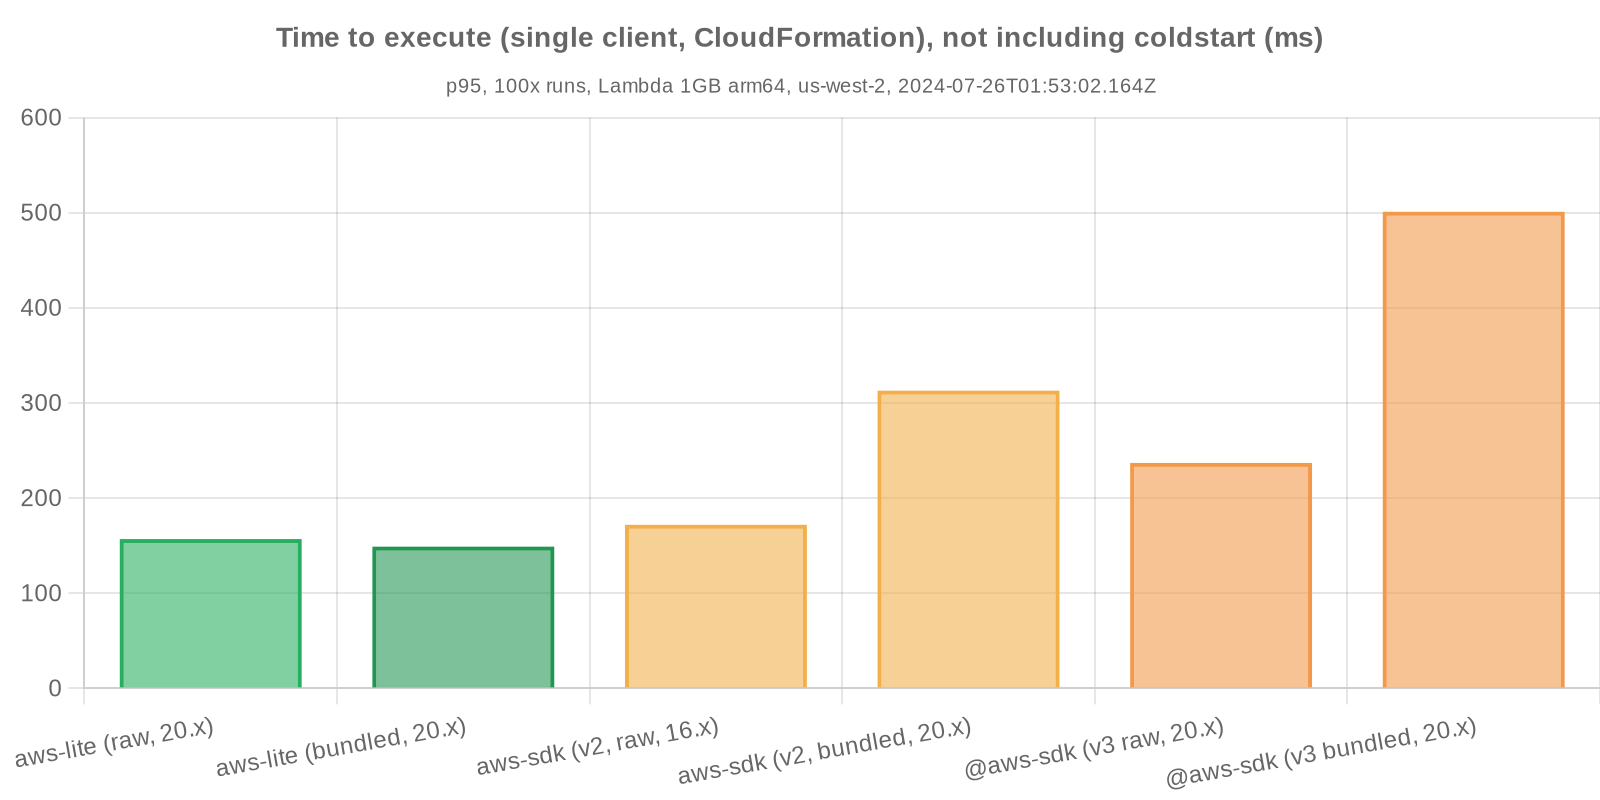 Benchmark statistics - Time to respond, not including coldstart (CloudFormation)